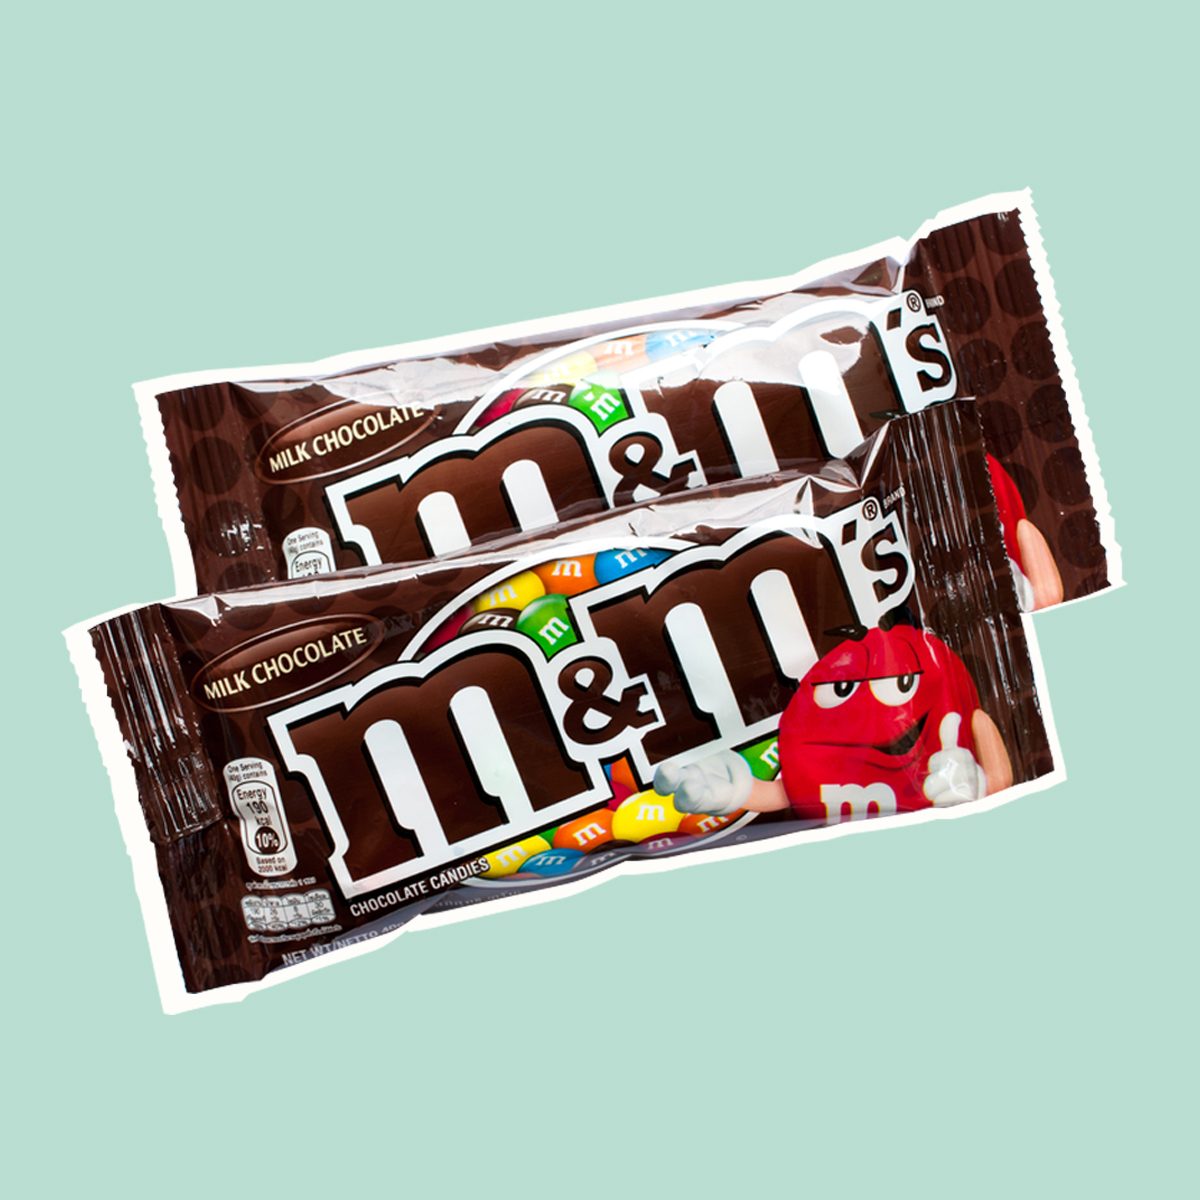 How 6 colorful characters propelled M&M's to become America's favorite candy